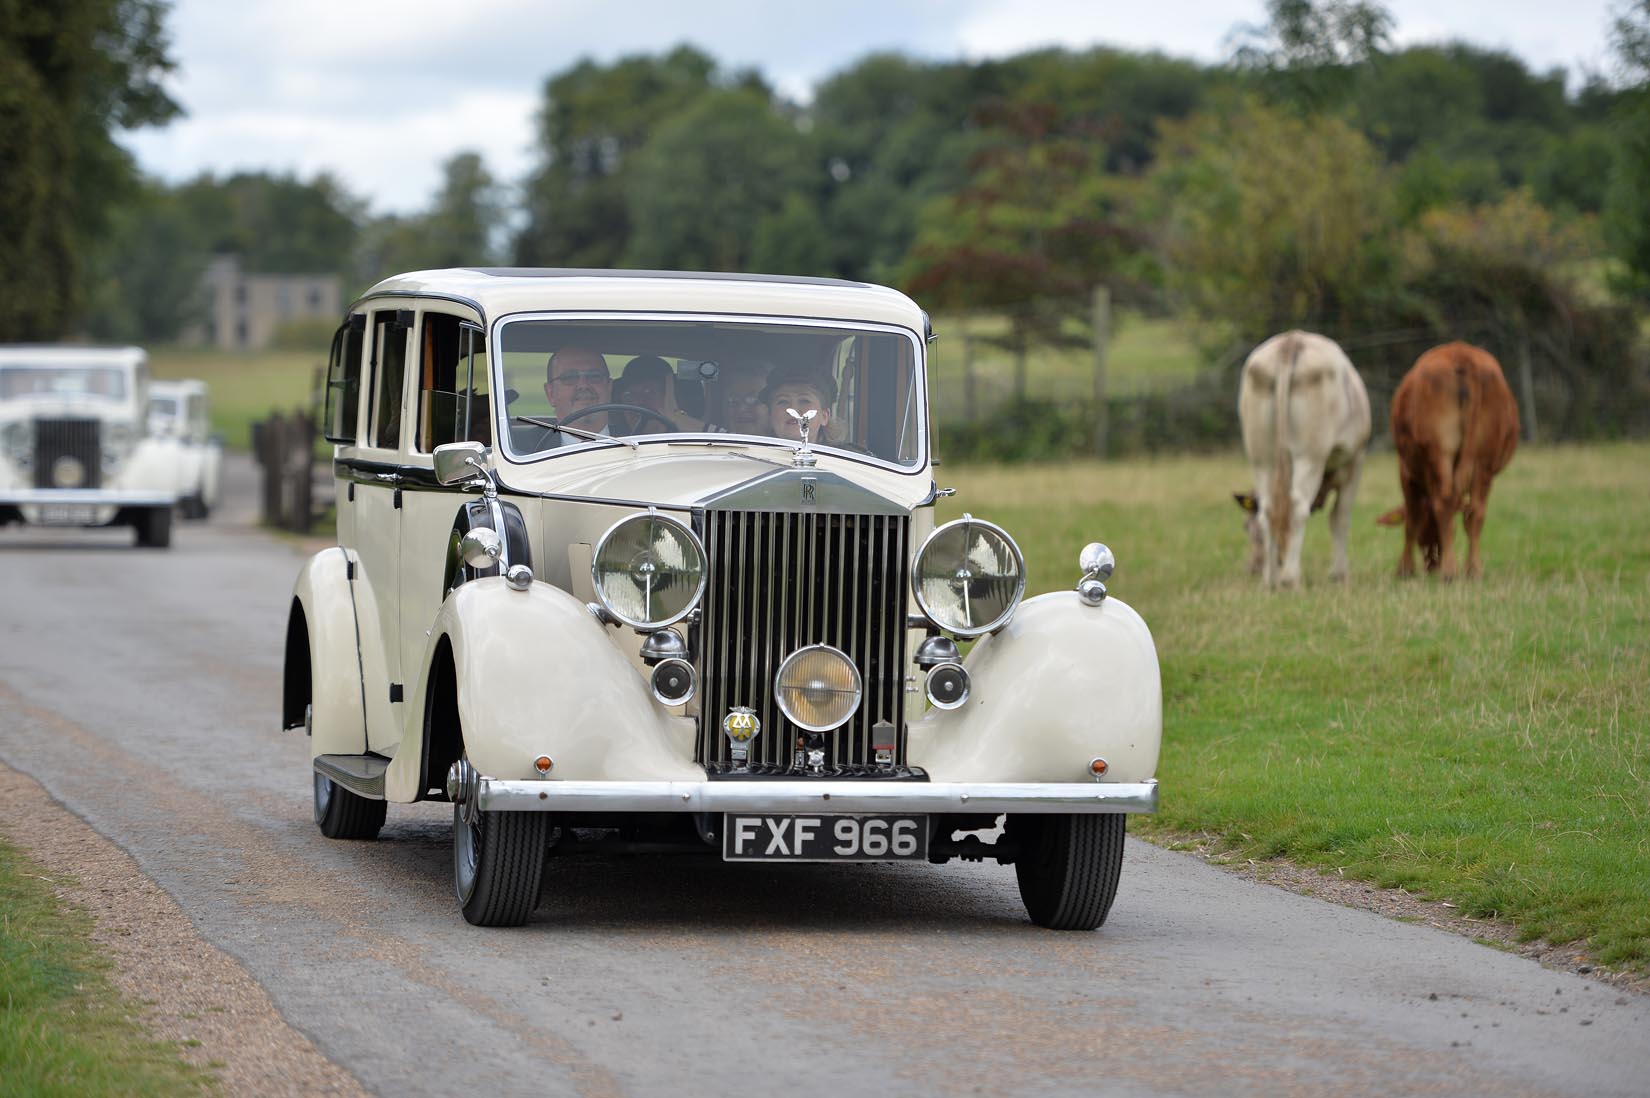 Arriving in style to the party in a fleet of Rolls-Royce's